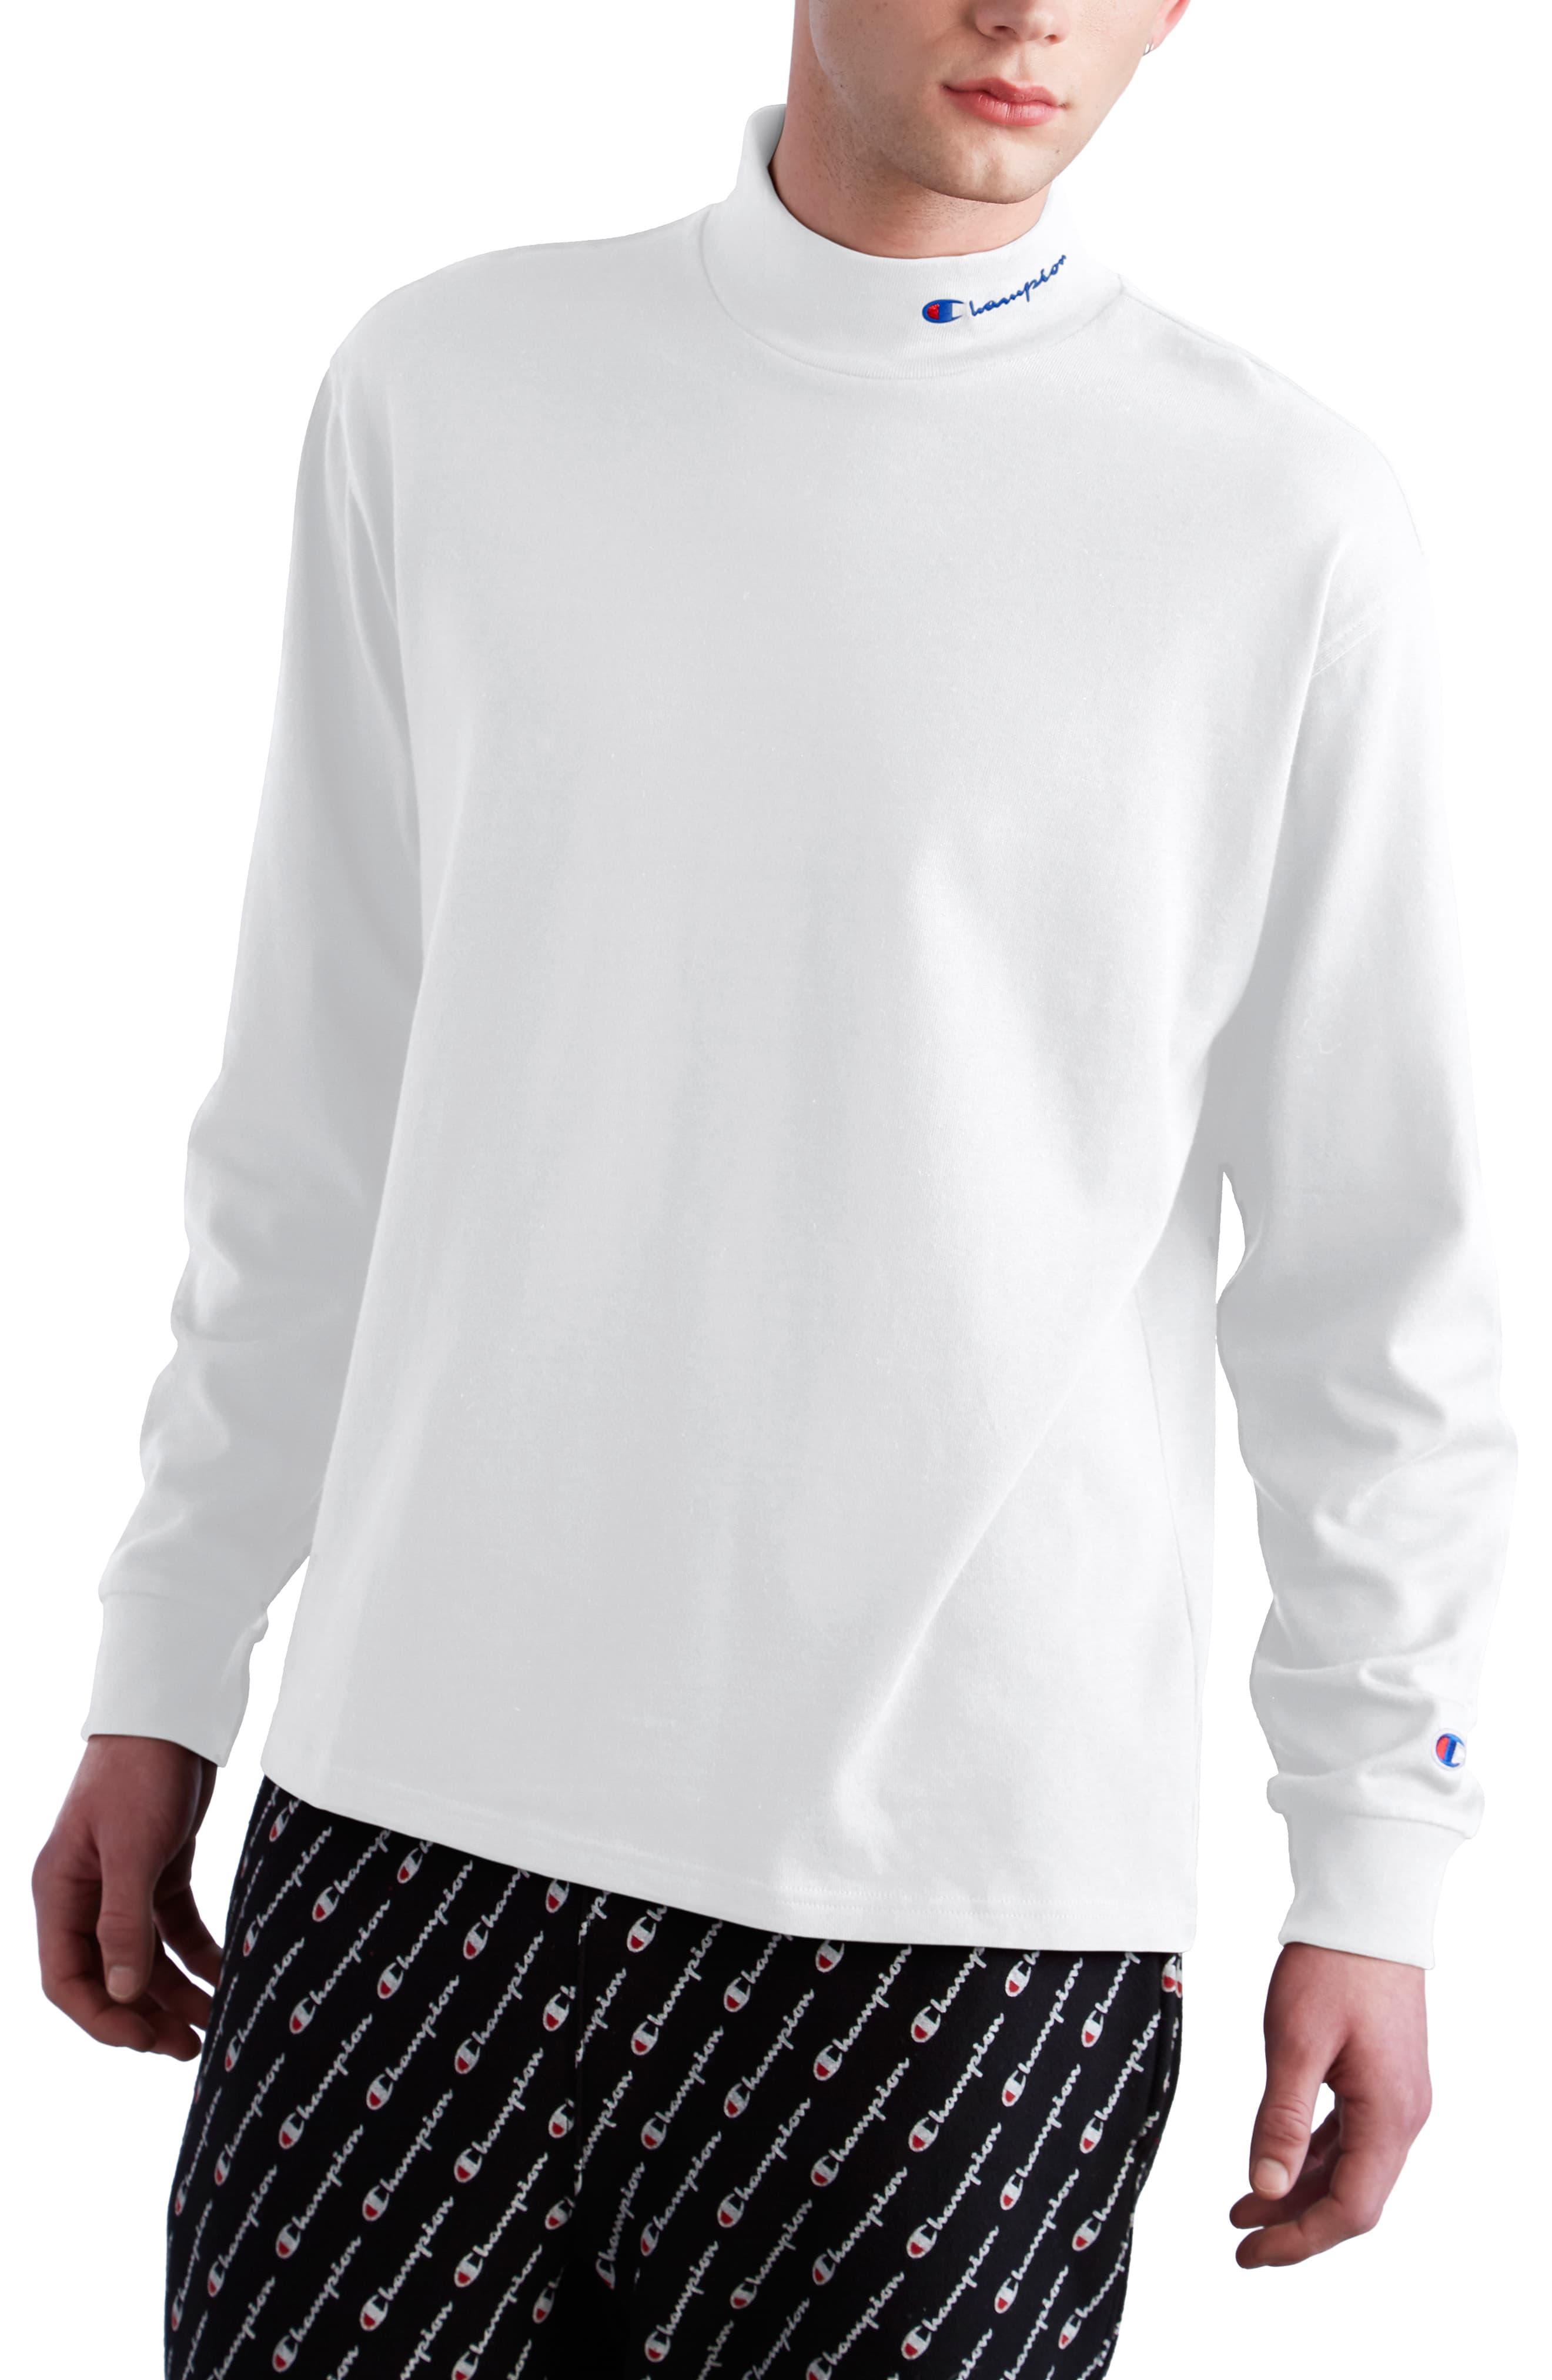 Champion Heavyweight Mock Neck T-shirt in White for Men - Lyst